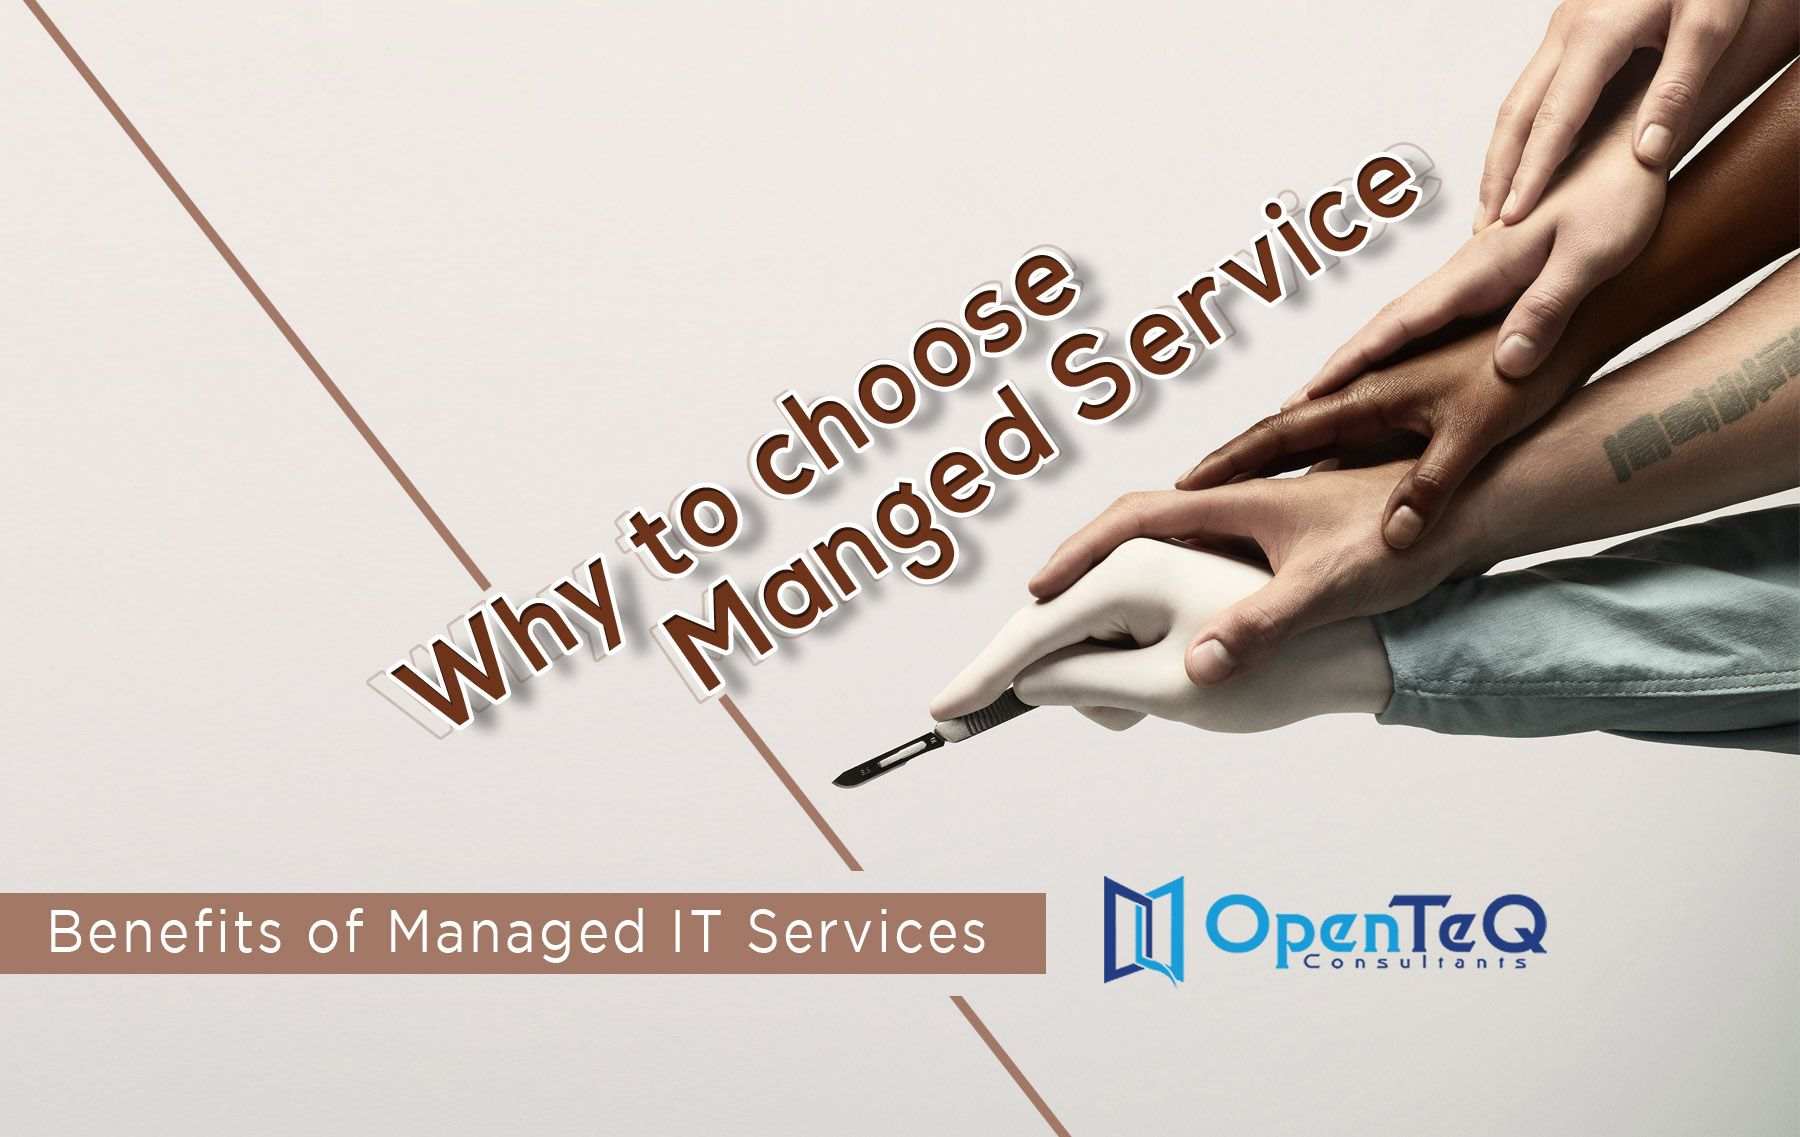 Managed Services for business|Benefits of Managed IT Services - OpenTeQ